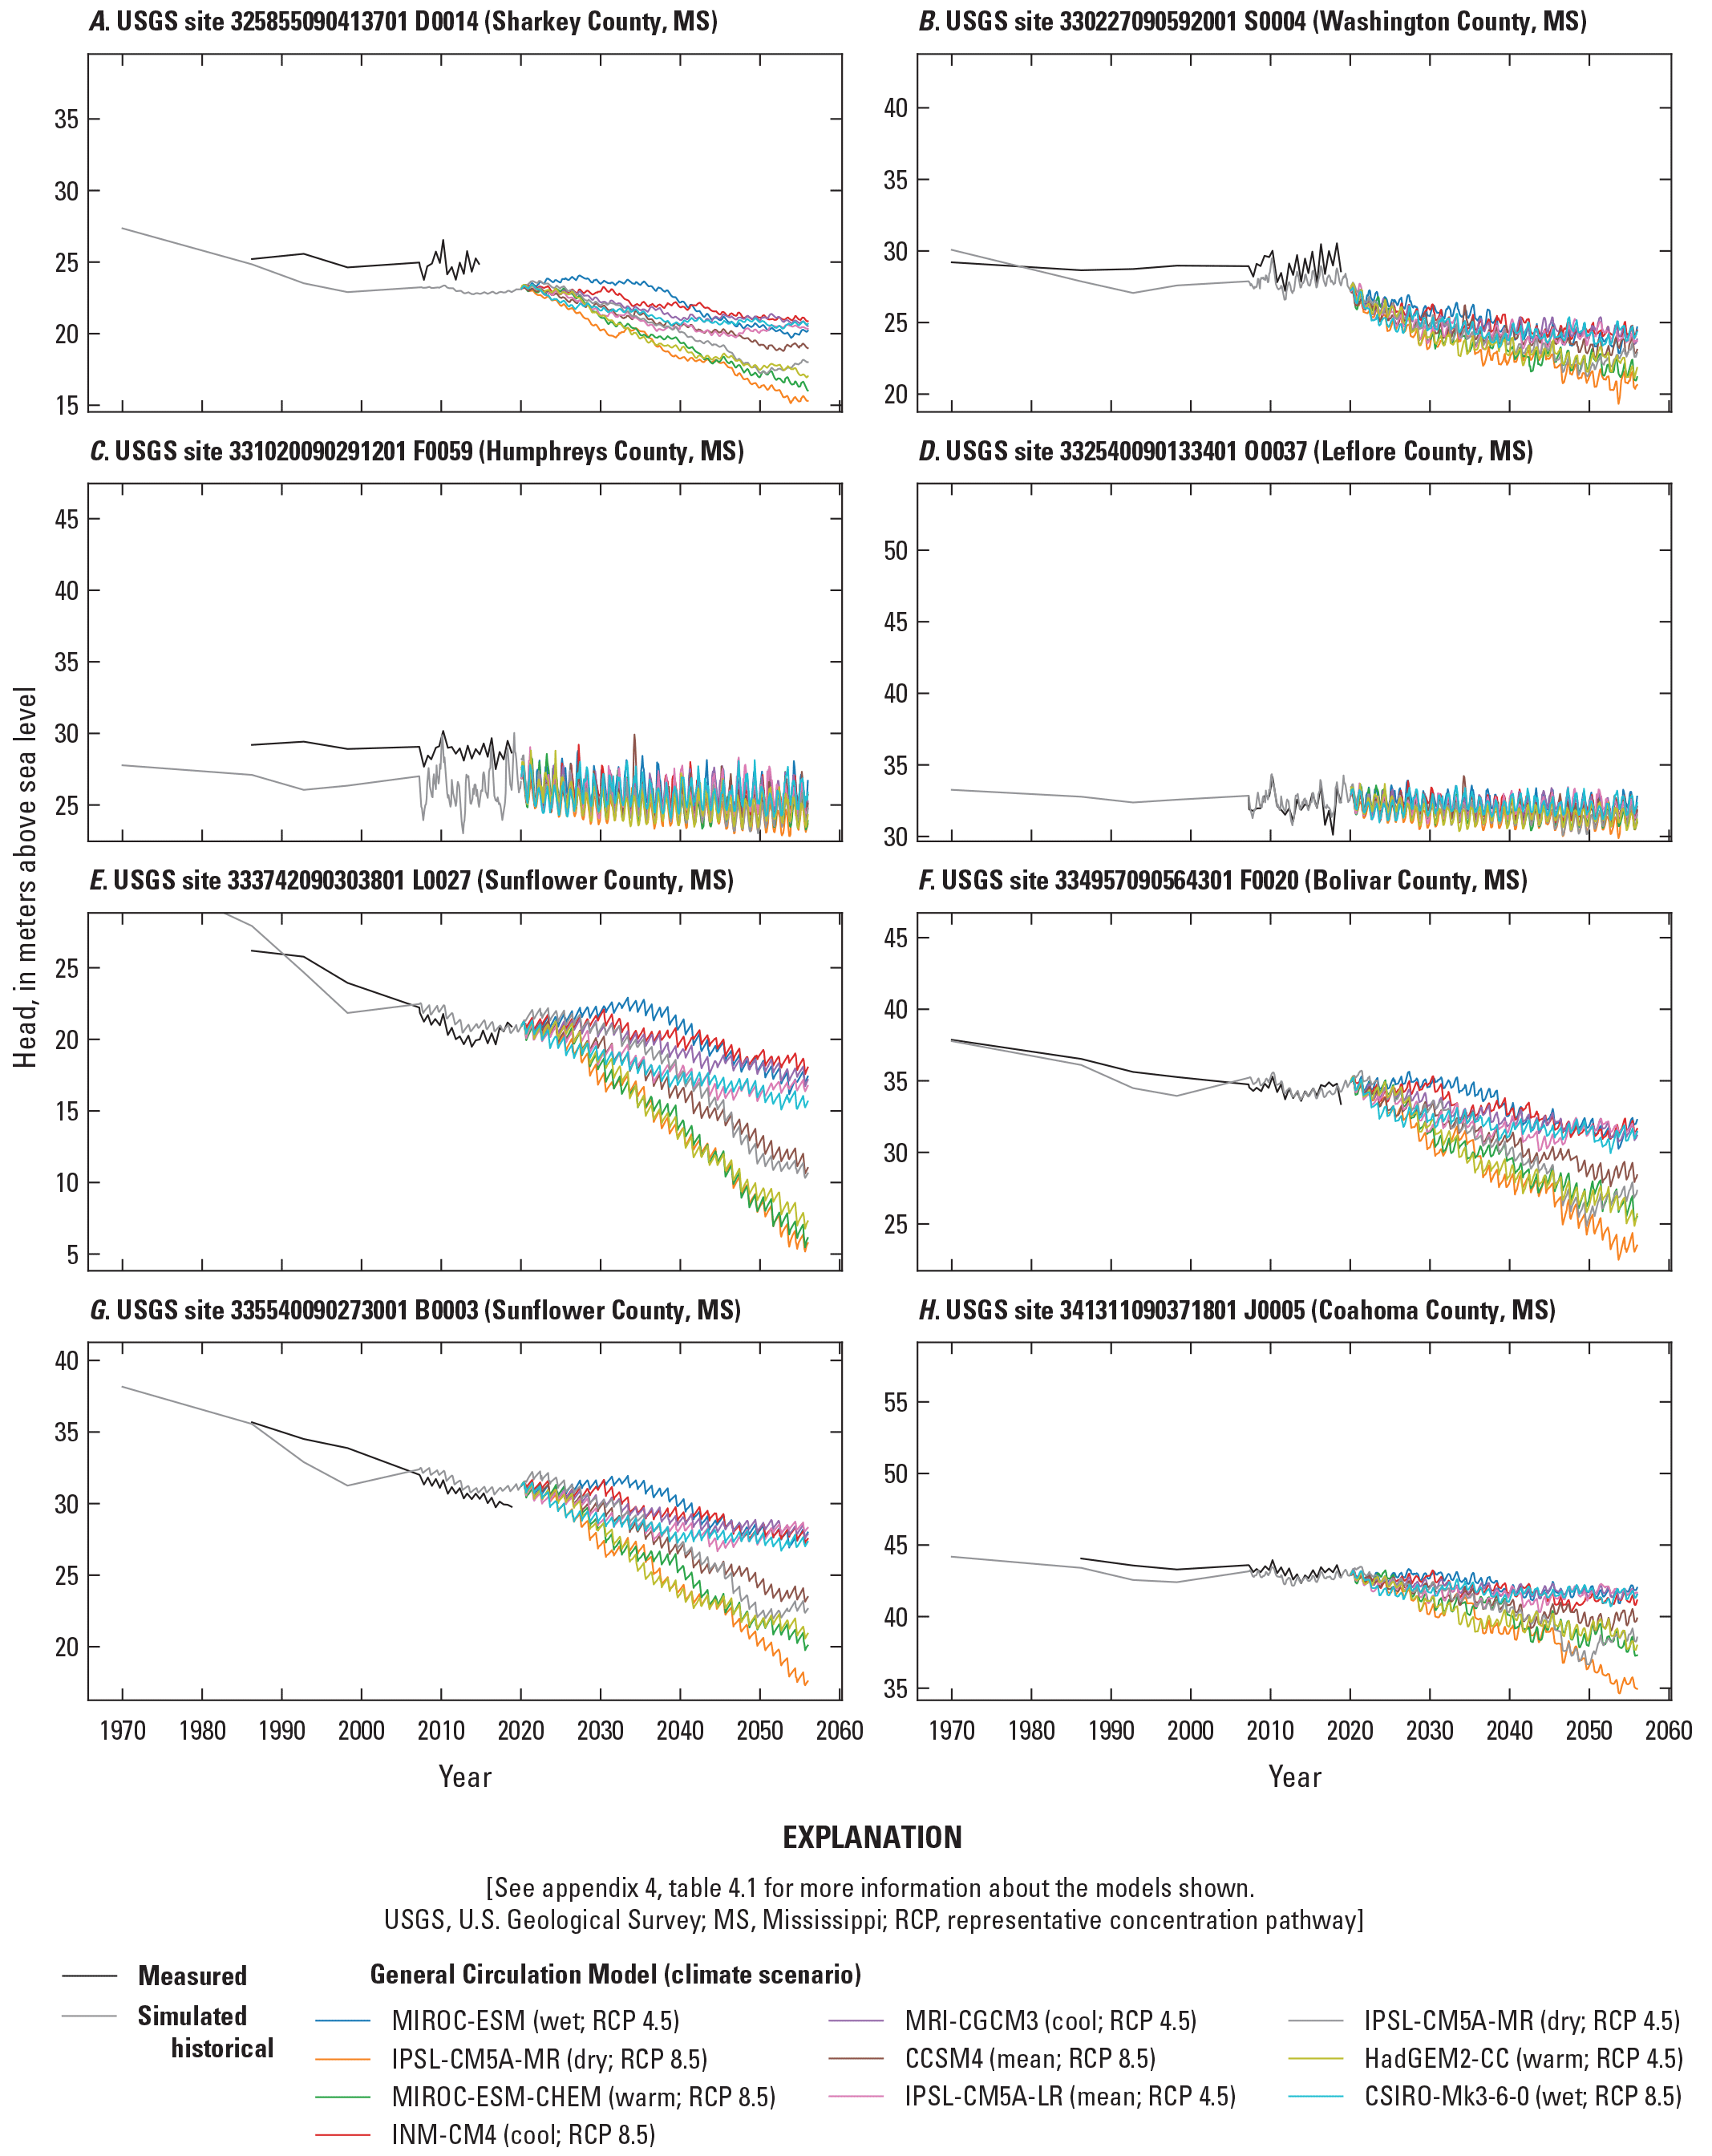 Wells less connected to surface water generally show the greatest declines, and most
                           uncertain future groundwater levels.